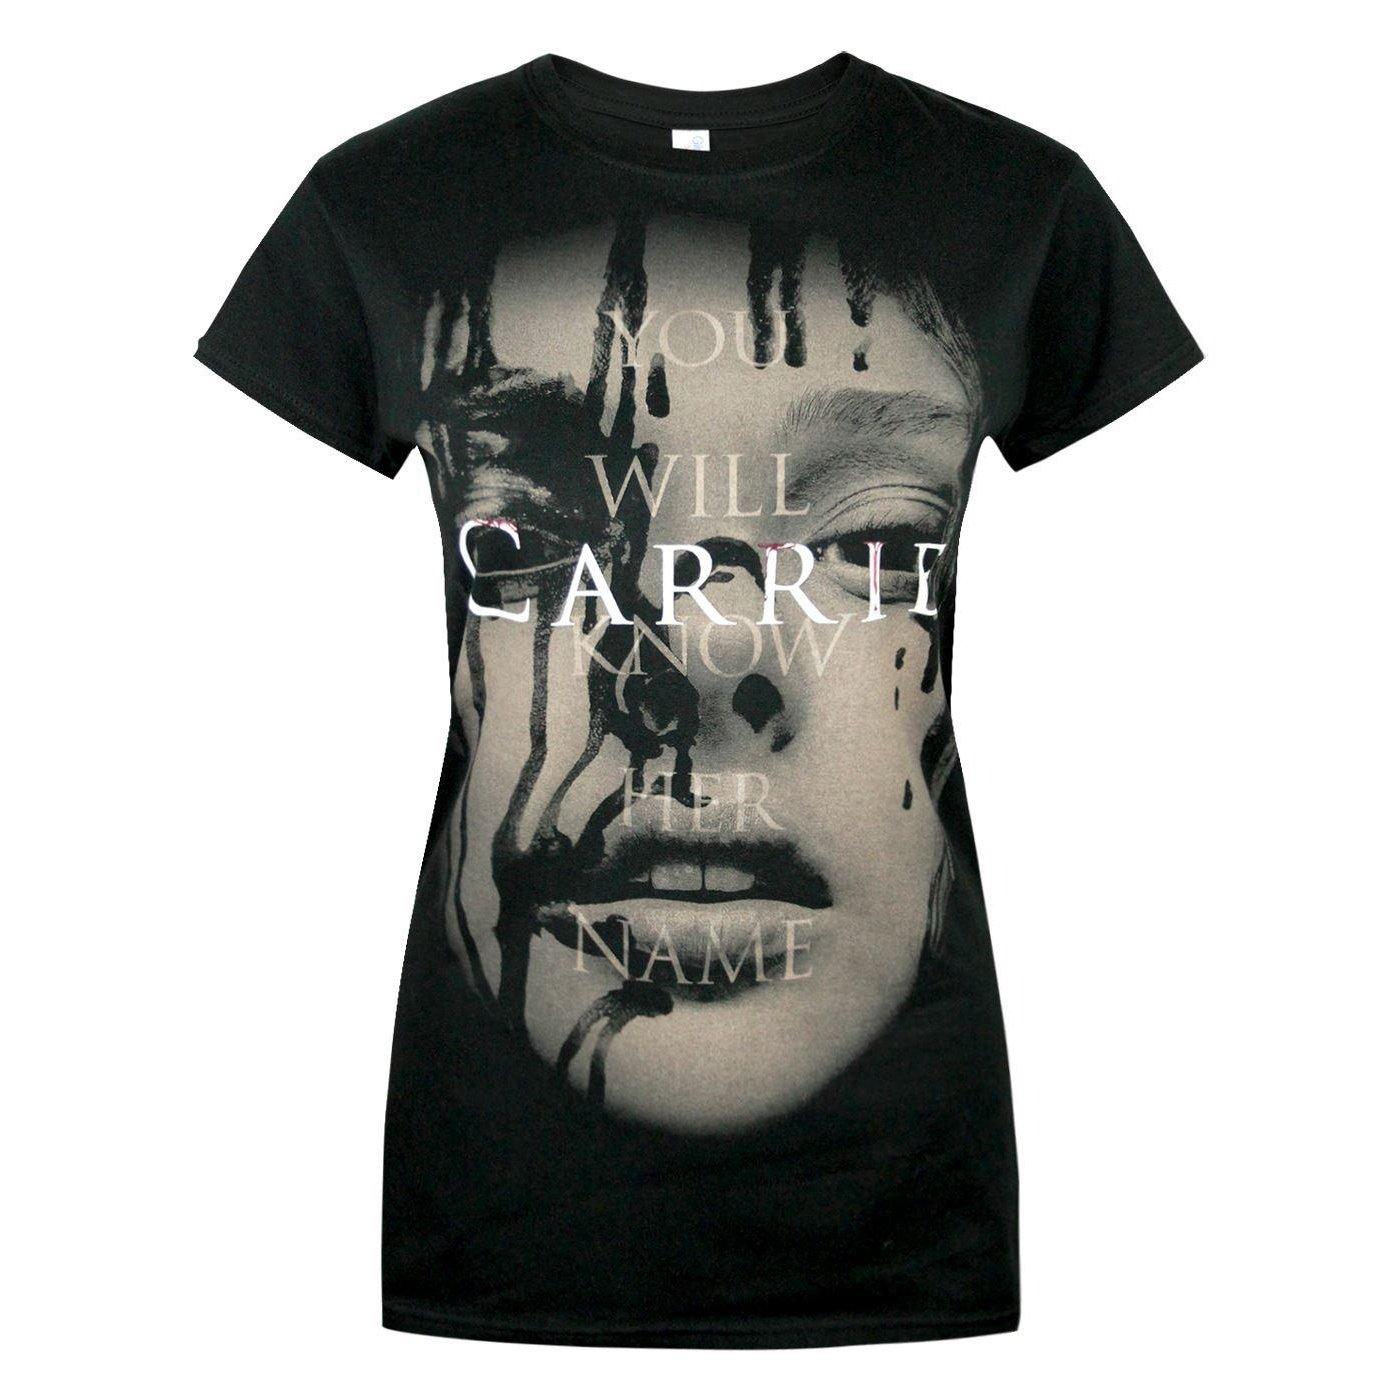 Image of Carrie The Movie 2013 TShirt - S